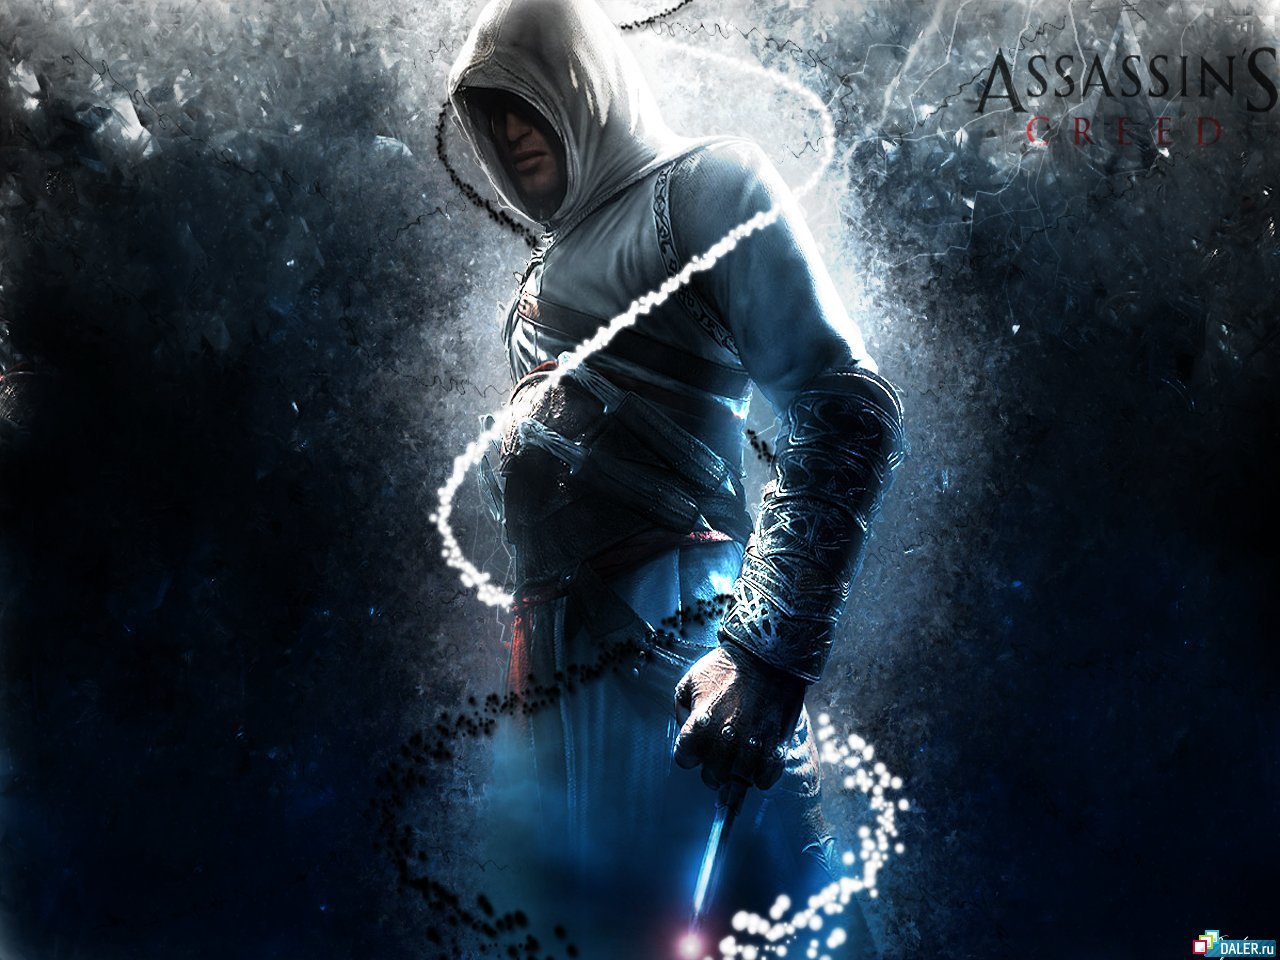 games, assassin's creed, blue Full HD